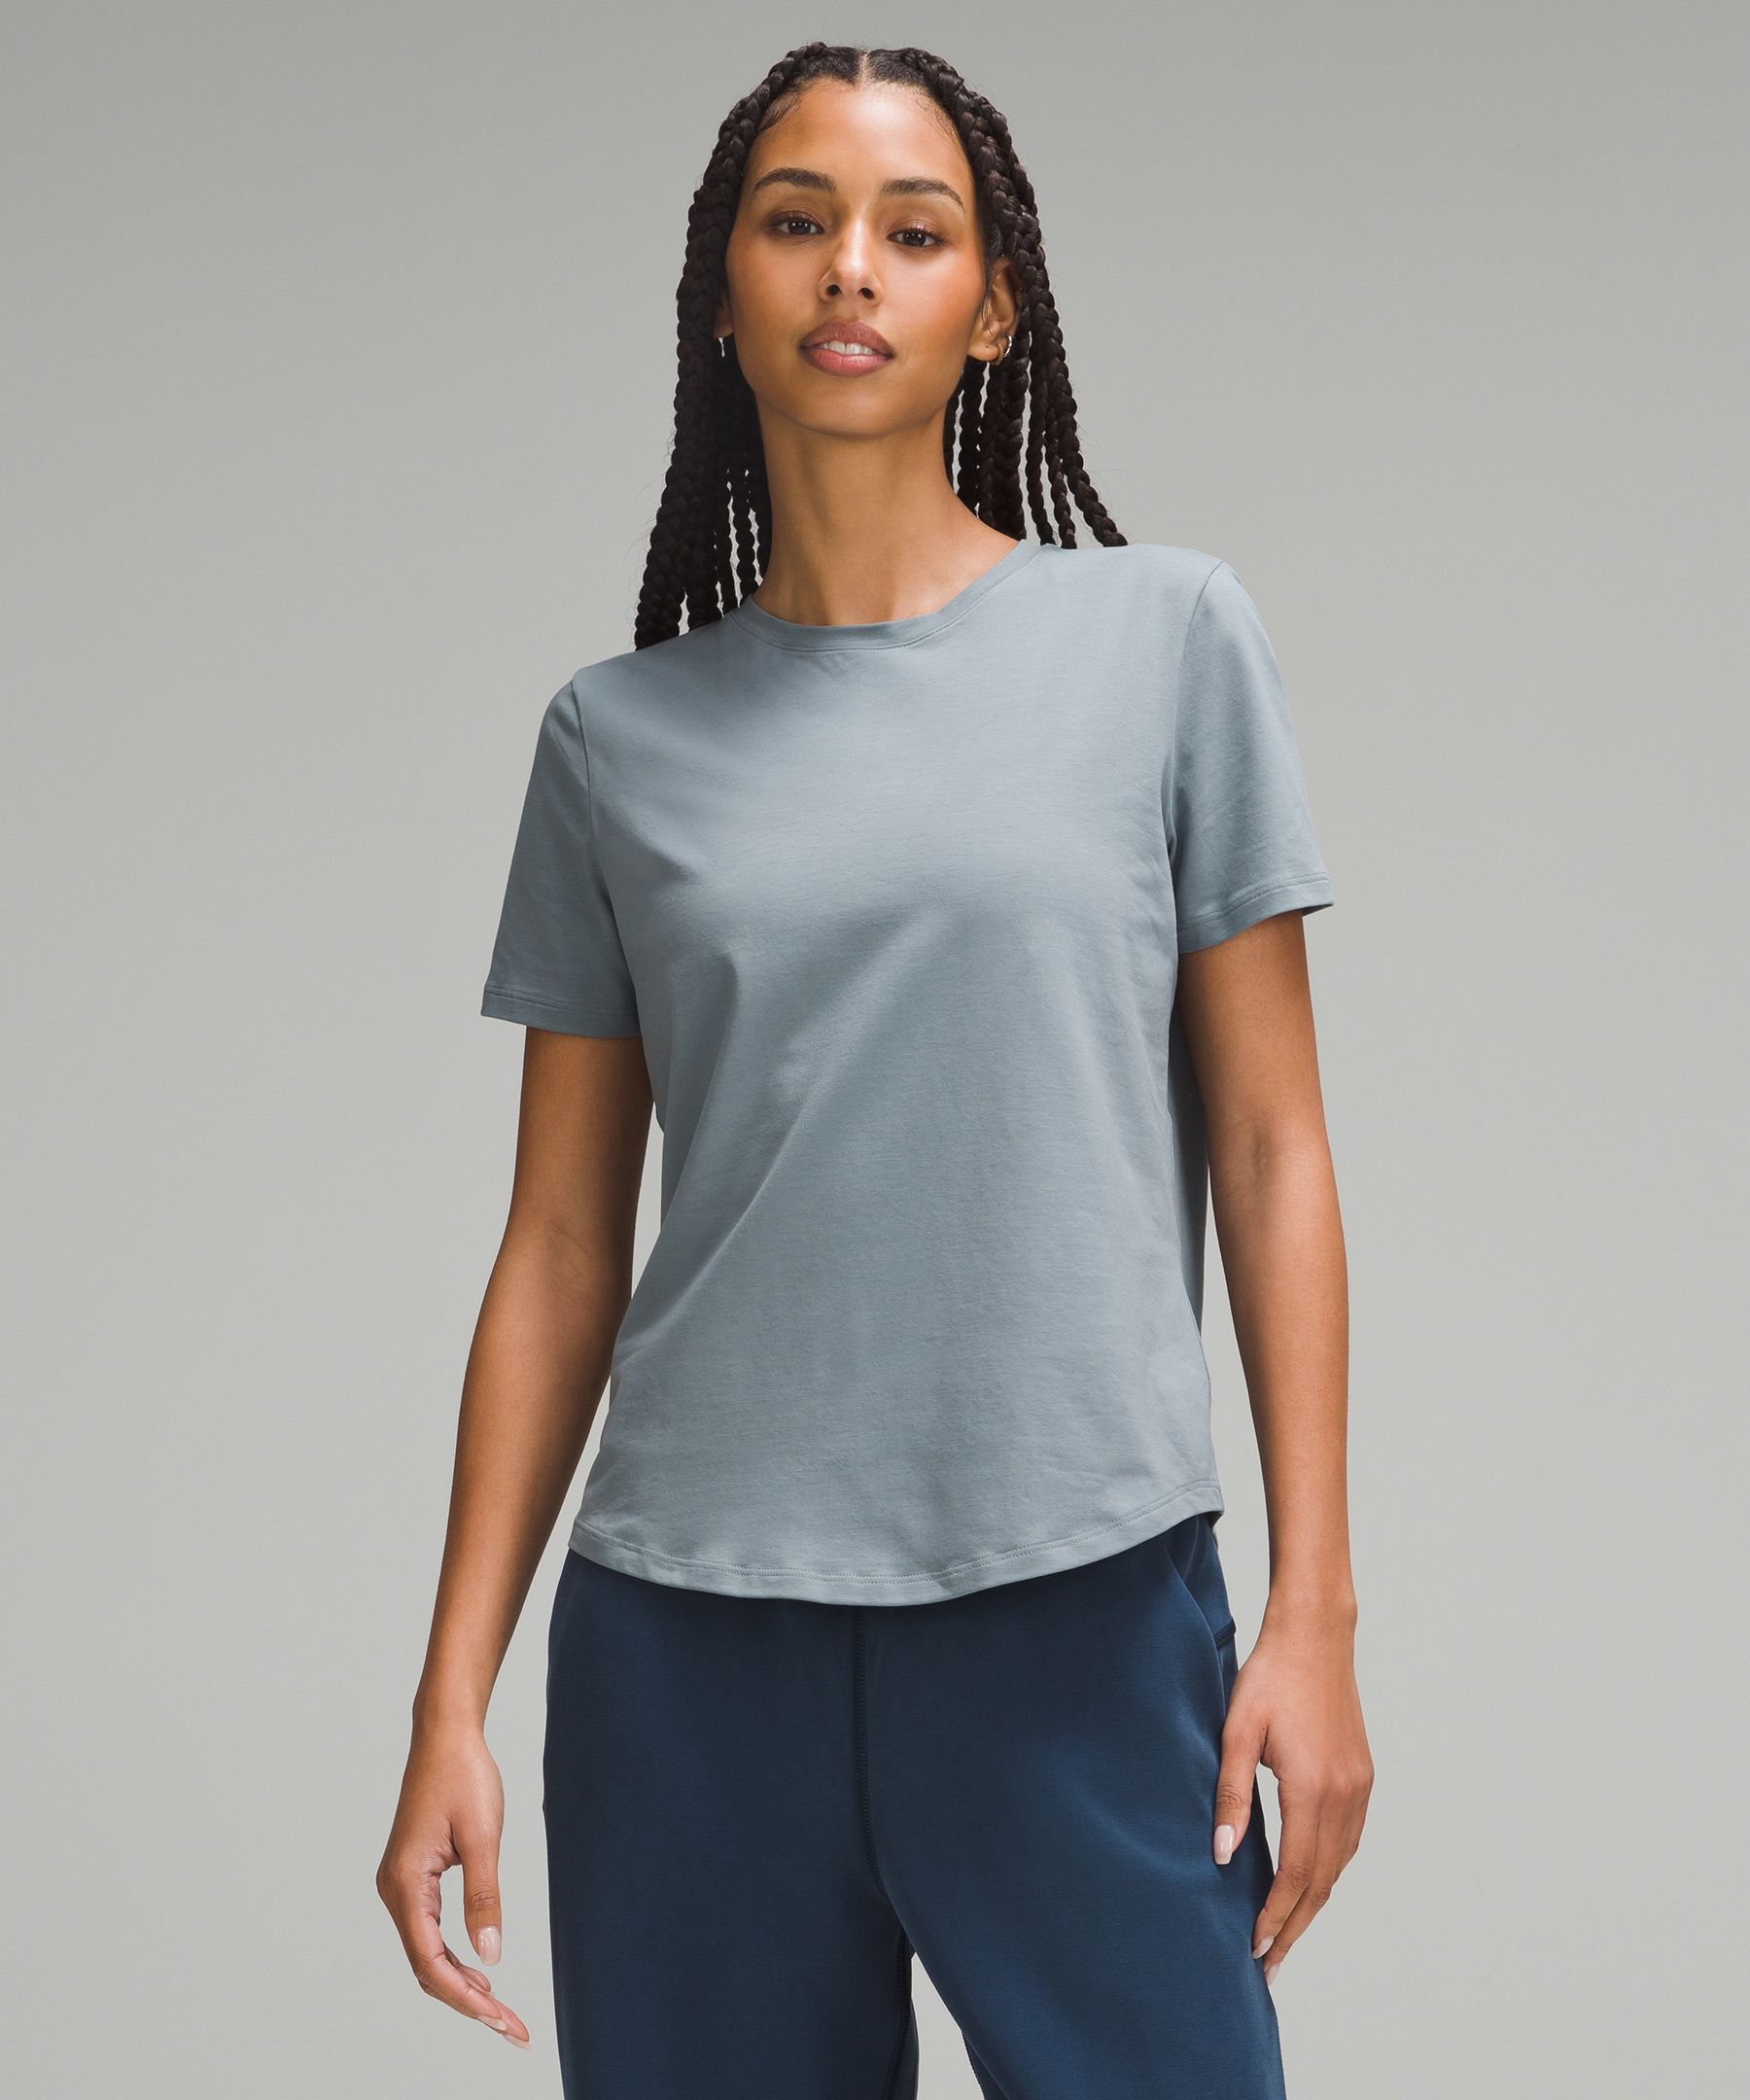 lululemon athletica The Muppets Button Down Shirts for Women